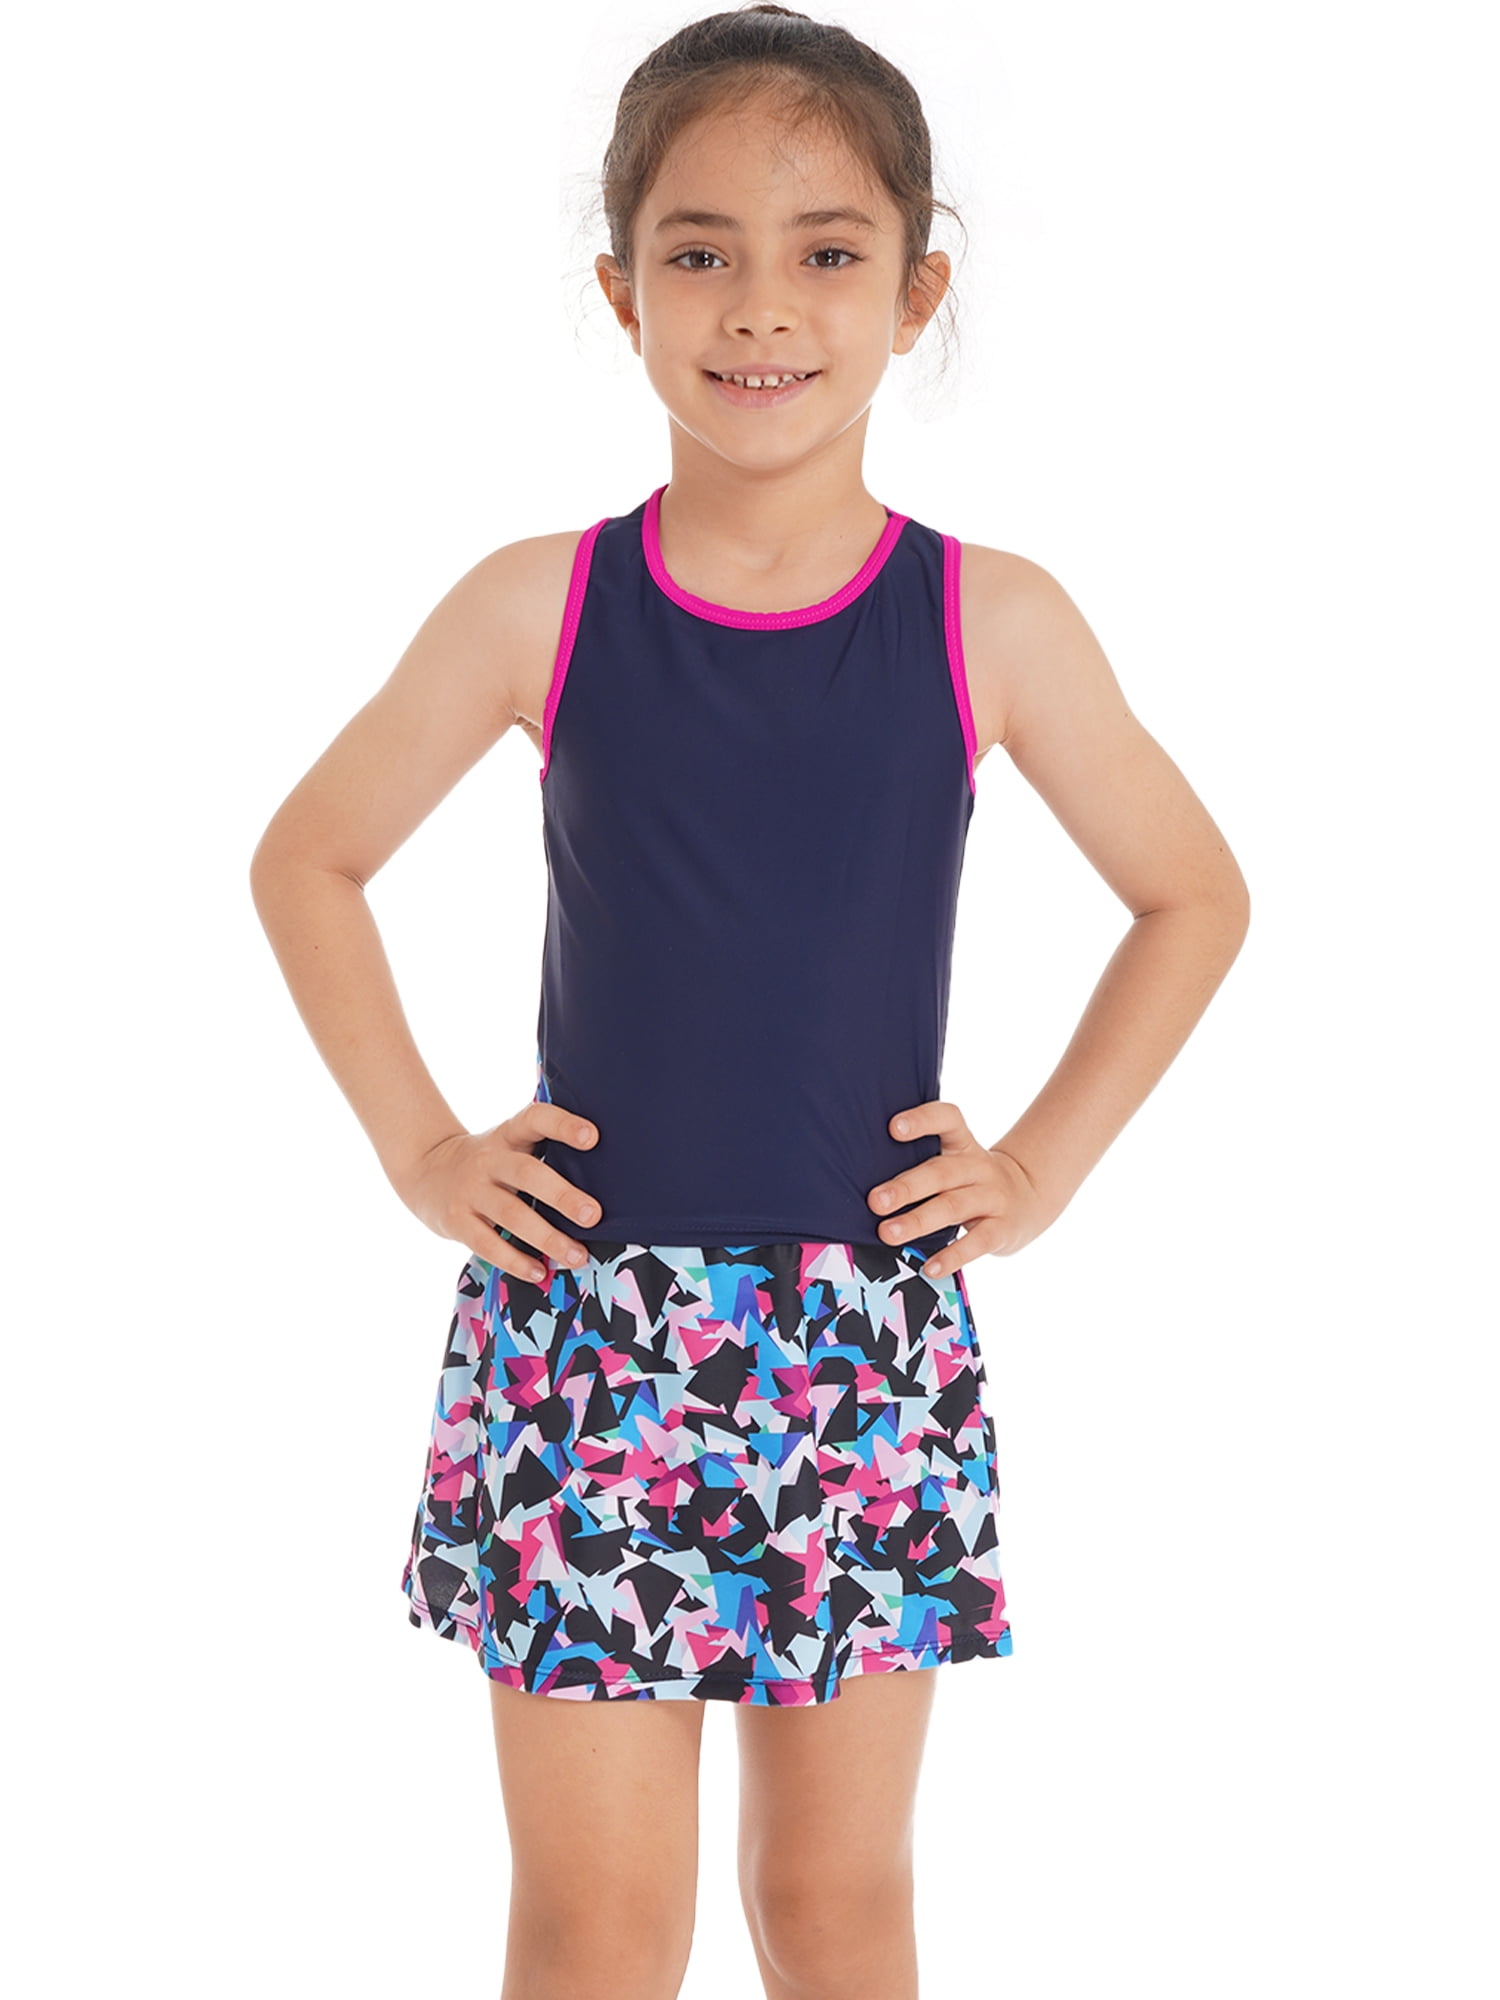 YEAHDOR Kids Girls 2Pcs Tennis Sports Outfit Racerback Vest with Skirt ...